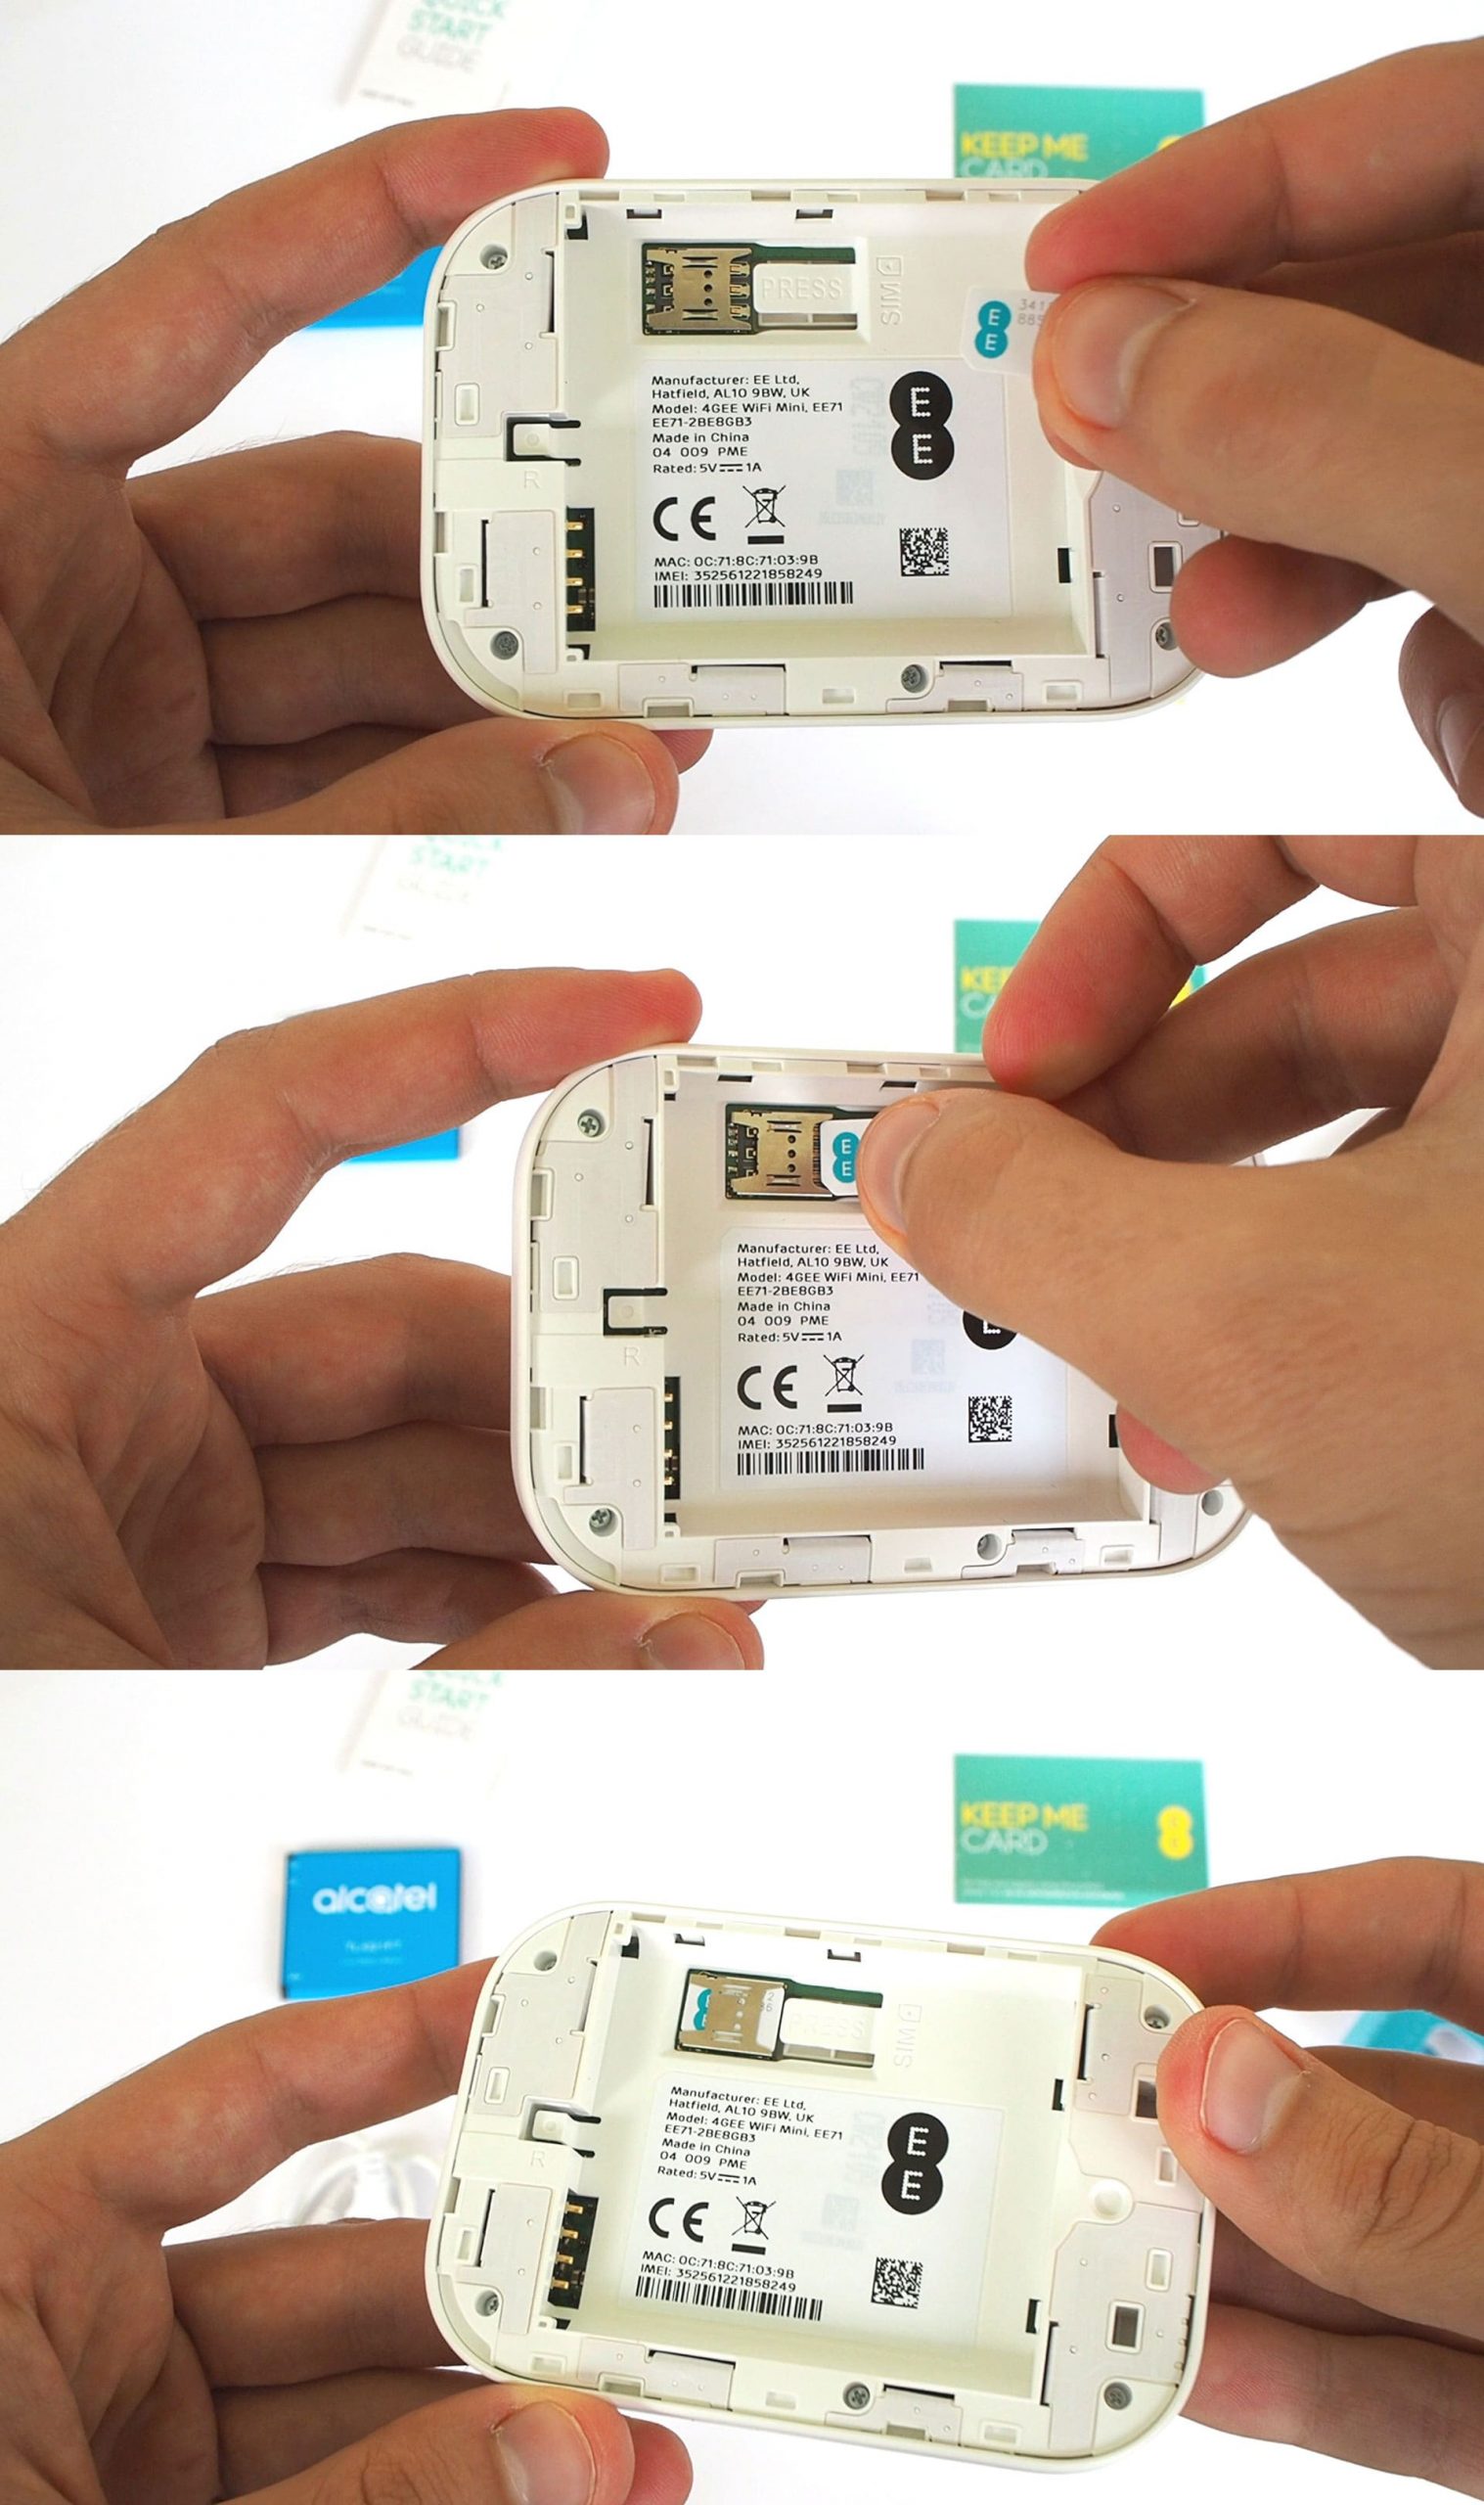 Inserting the SIM card into the 4GEE WiFi Mini.